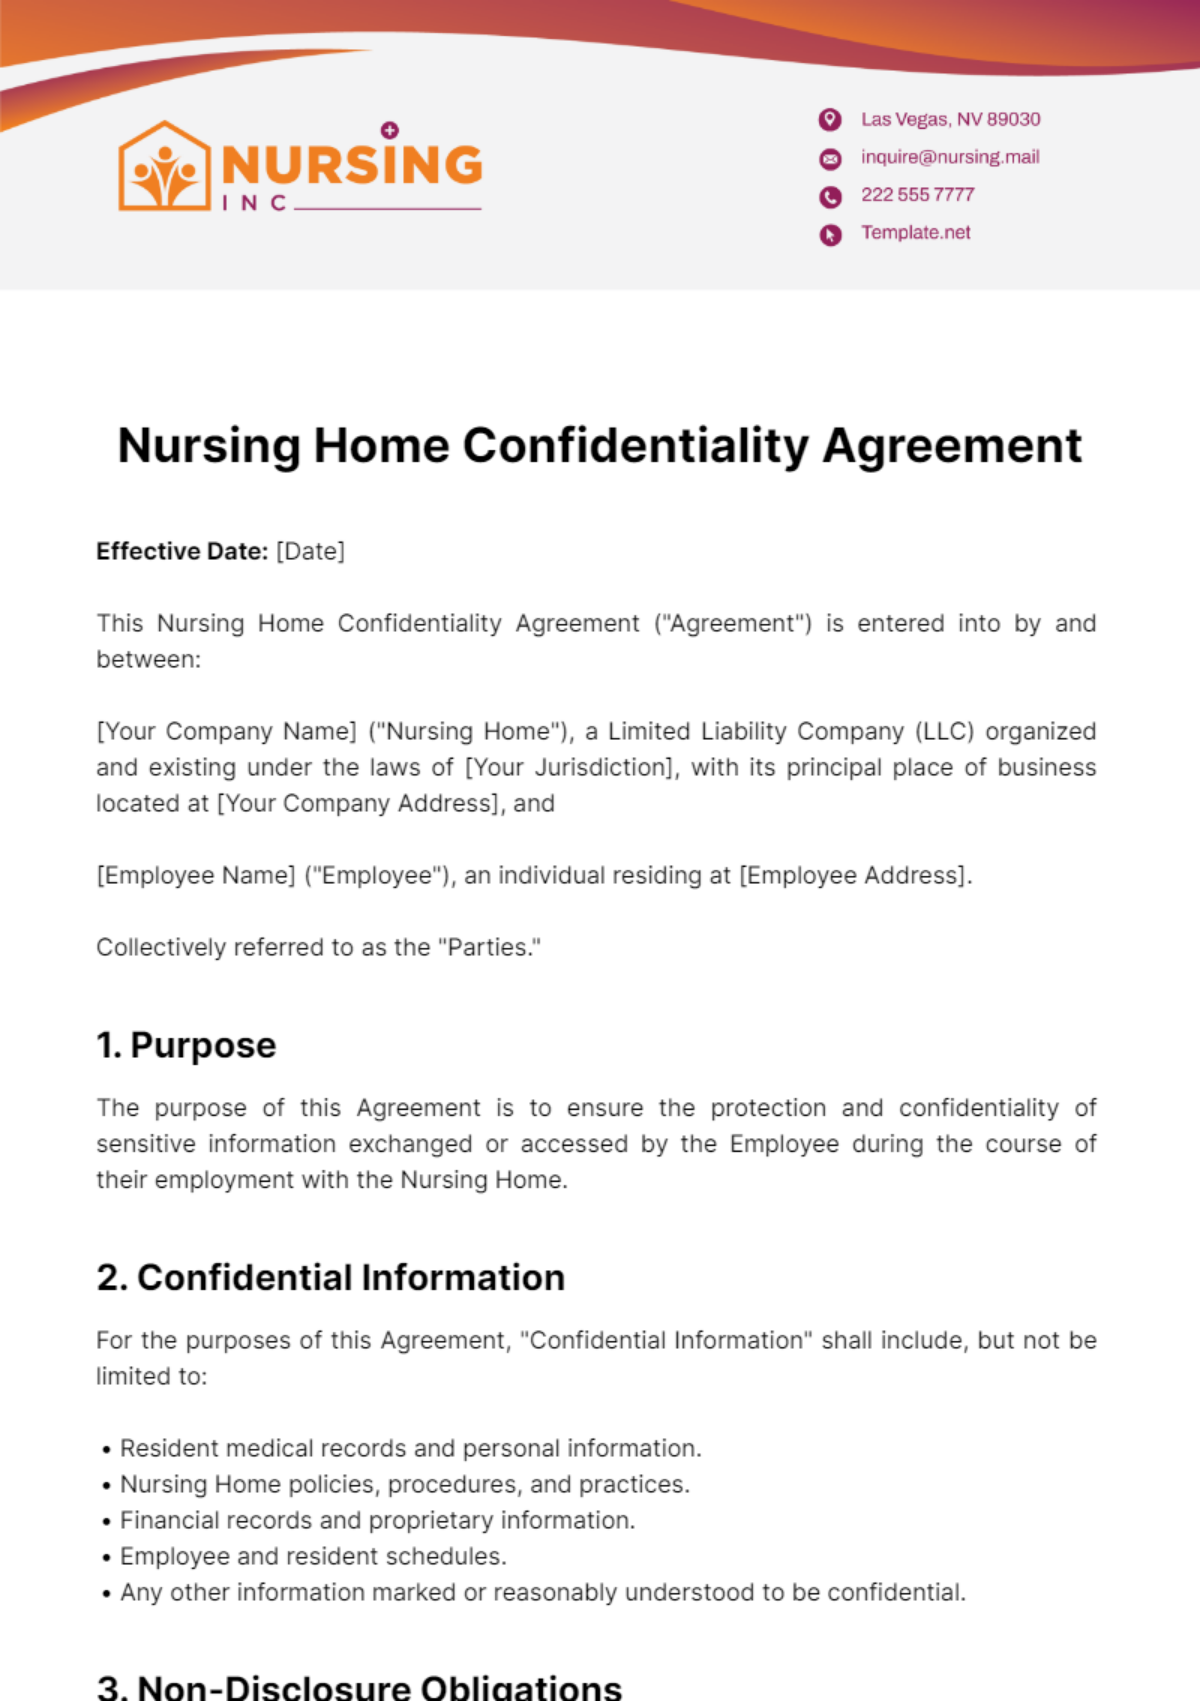 Nursing Home Confidentiality Agreement Template